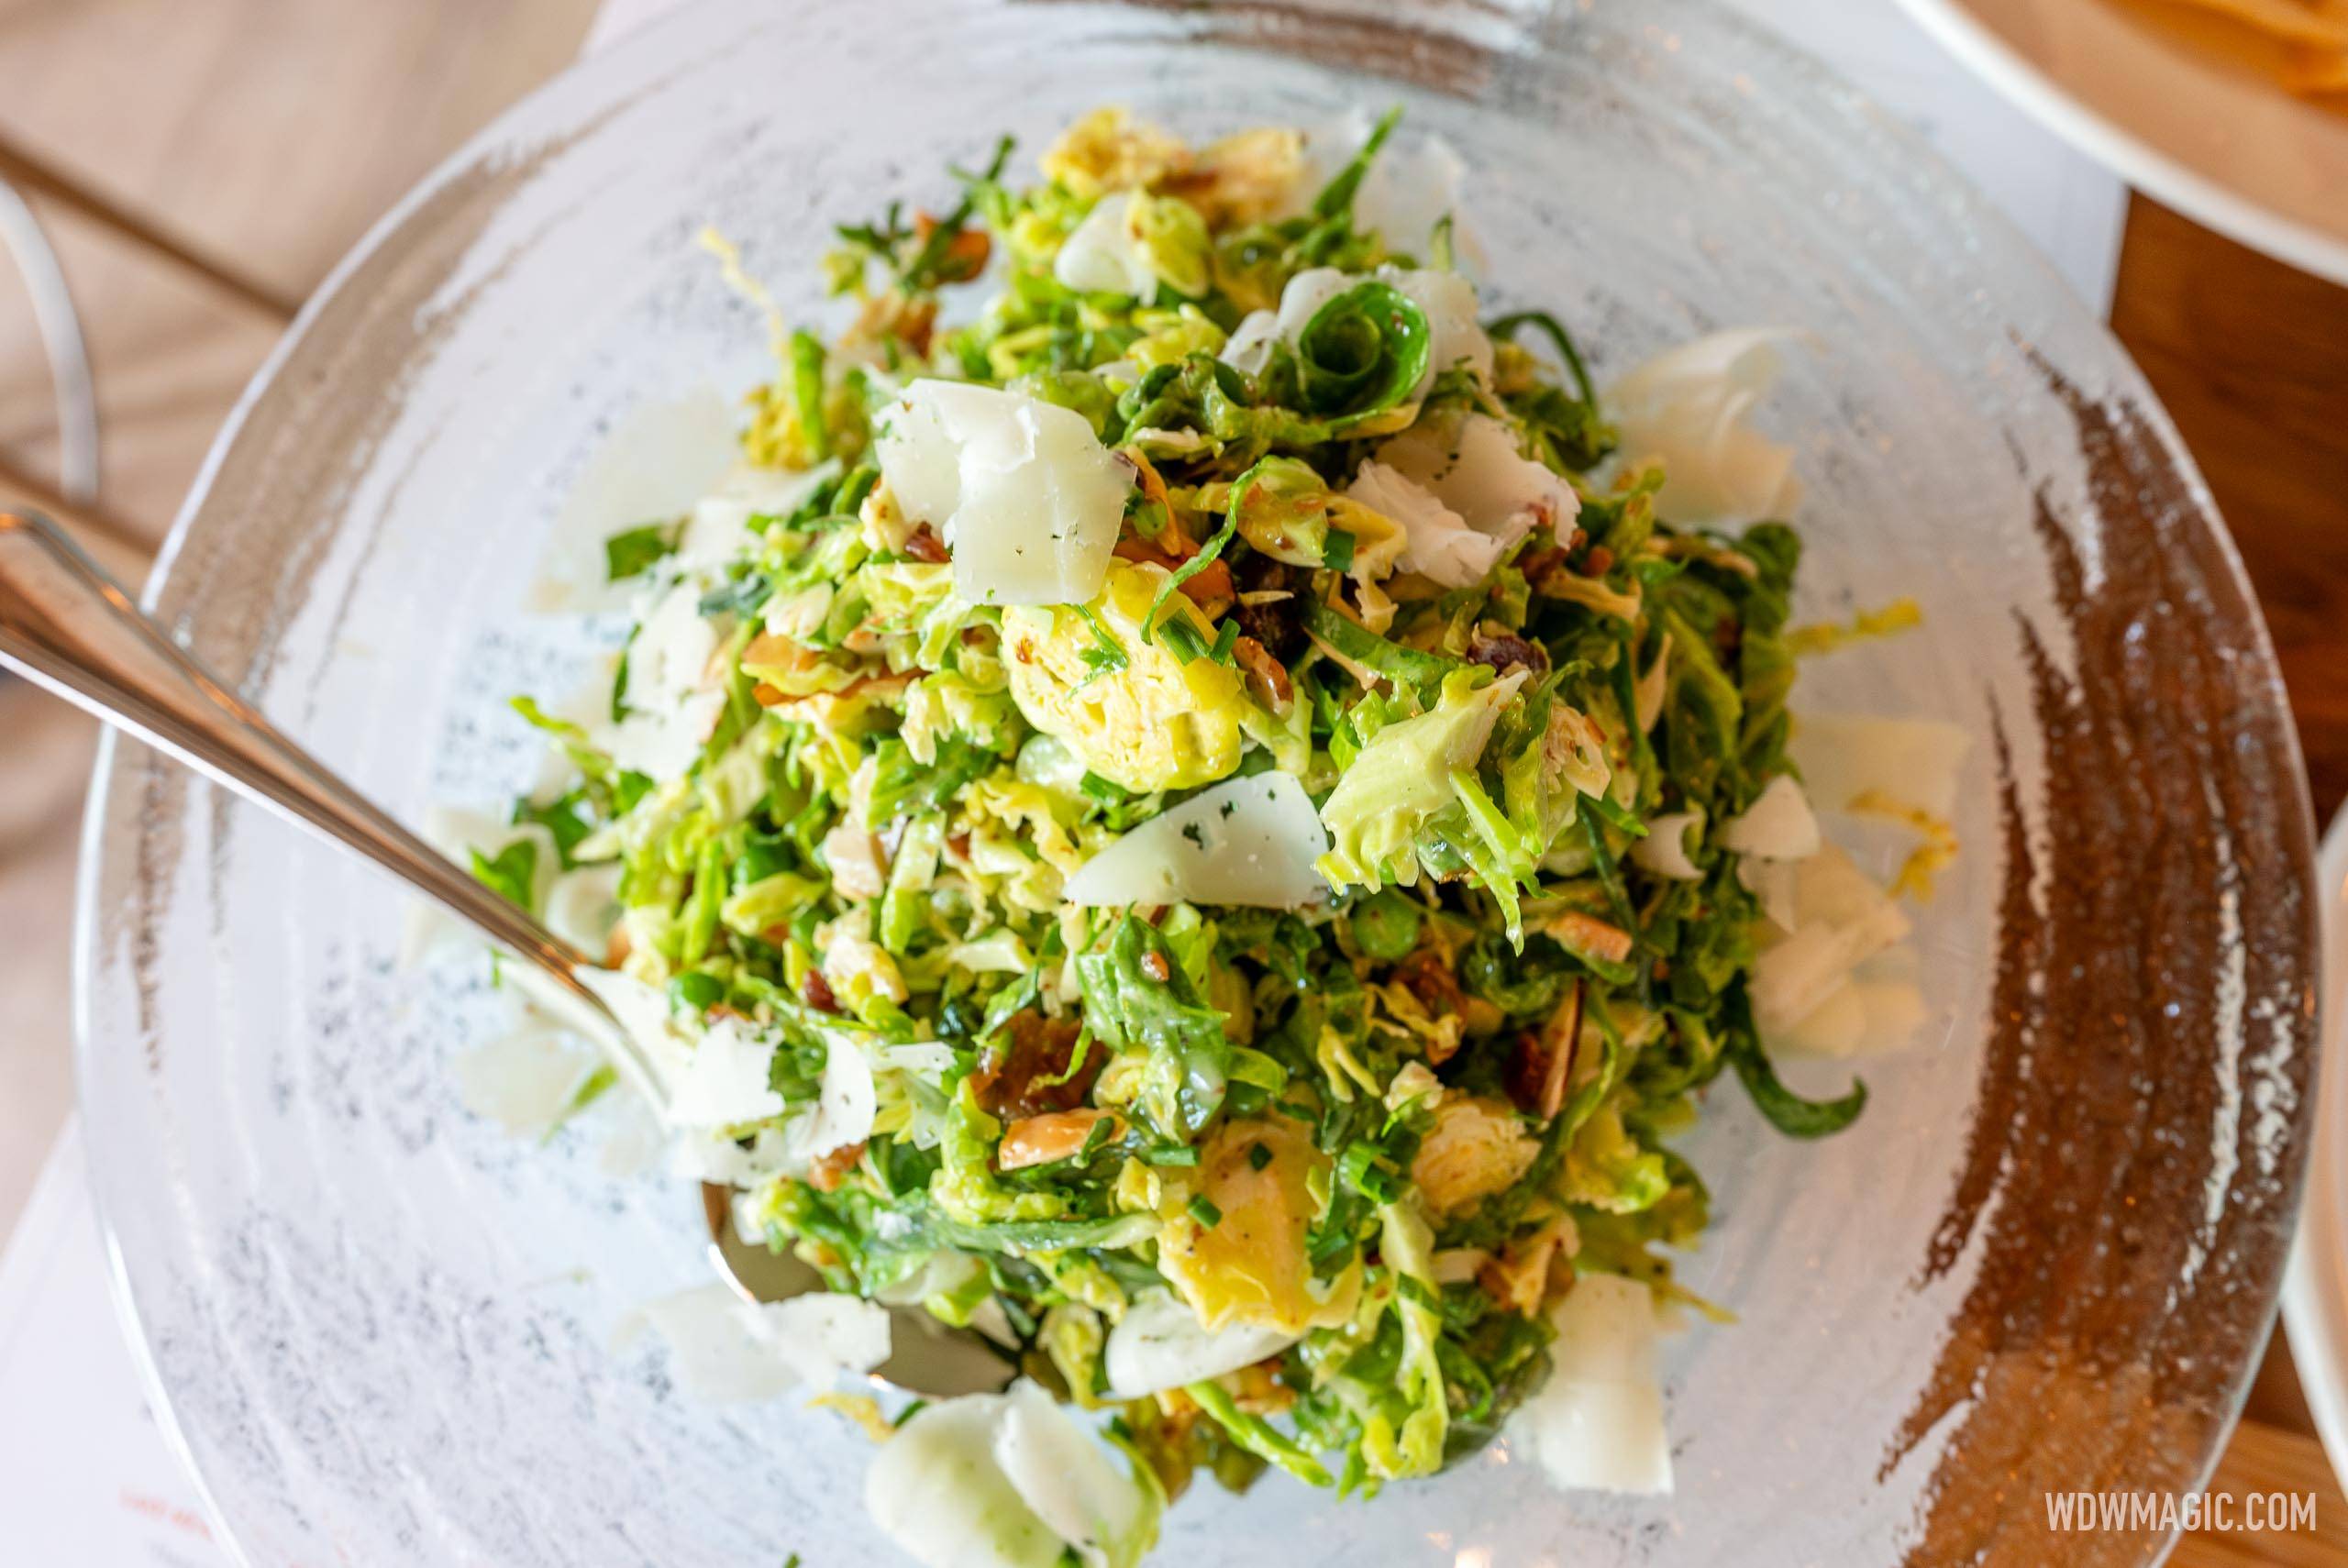 Shaved brussels sprouts salad